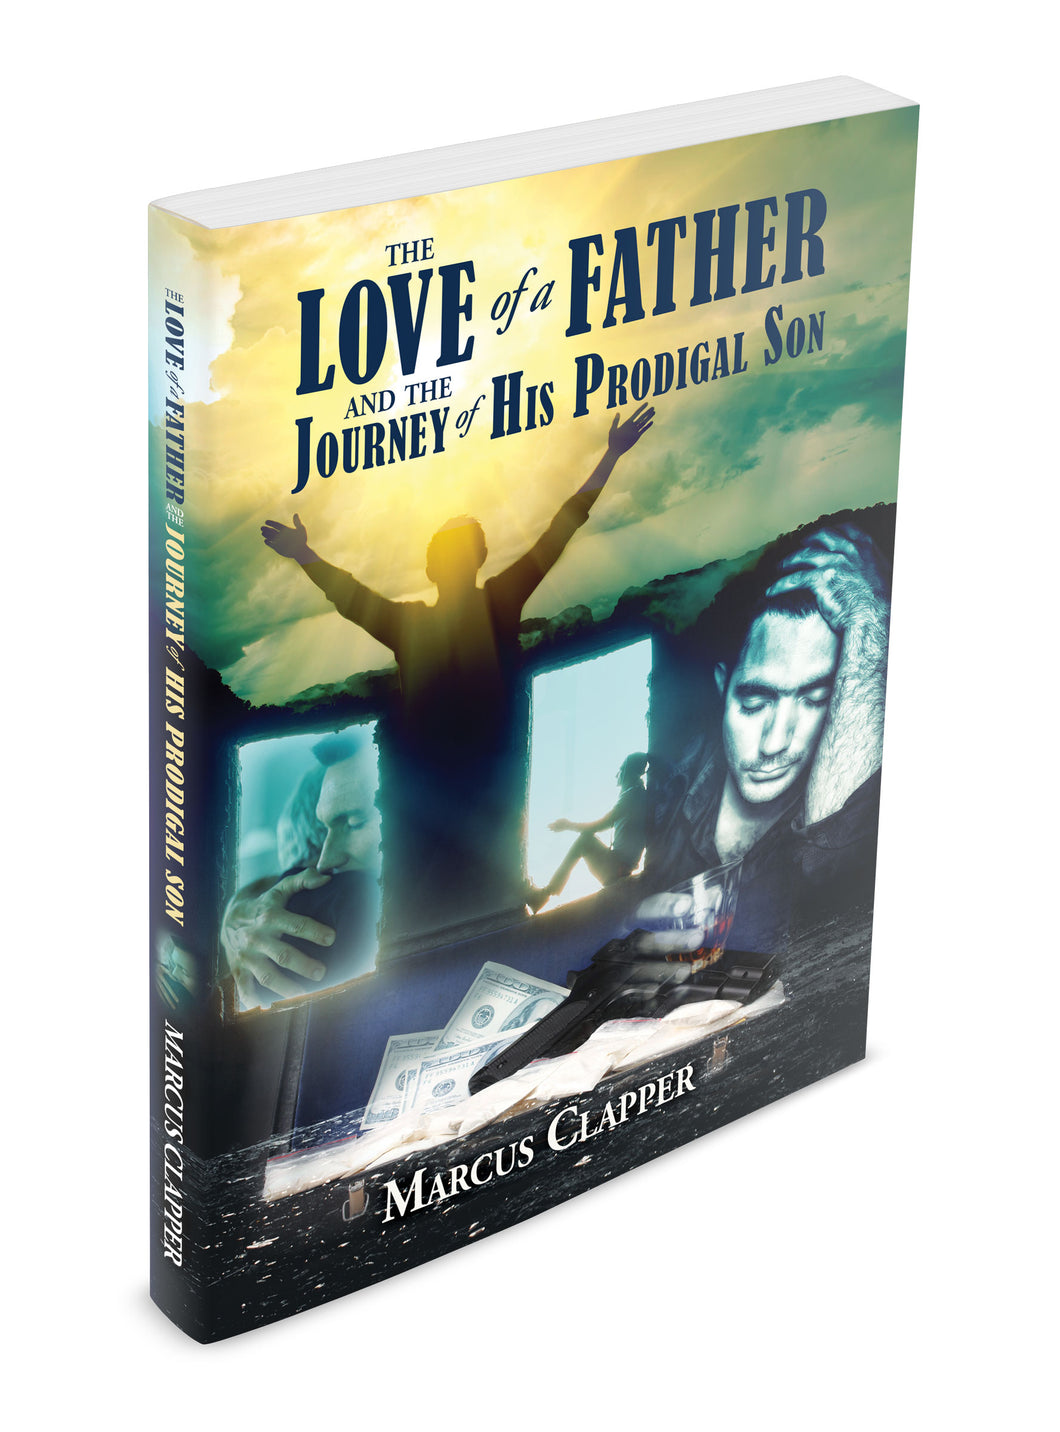 The Love of a Father and the Journey of His Prodigal Son